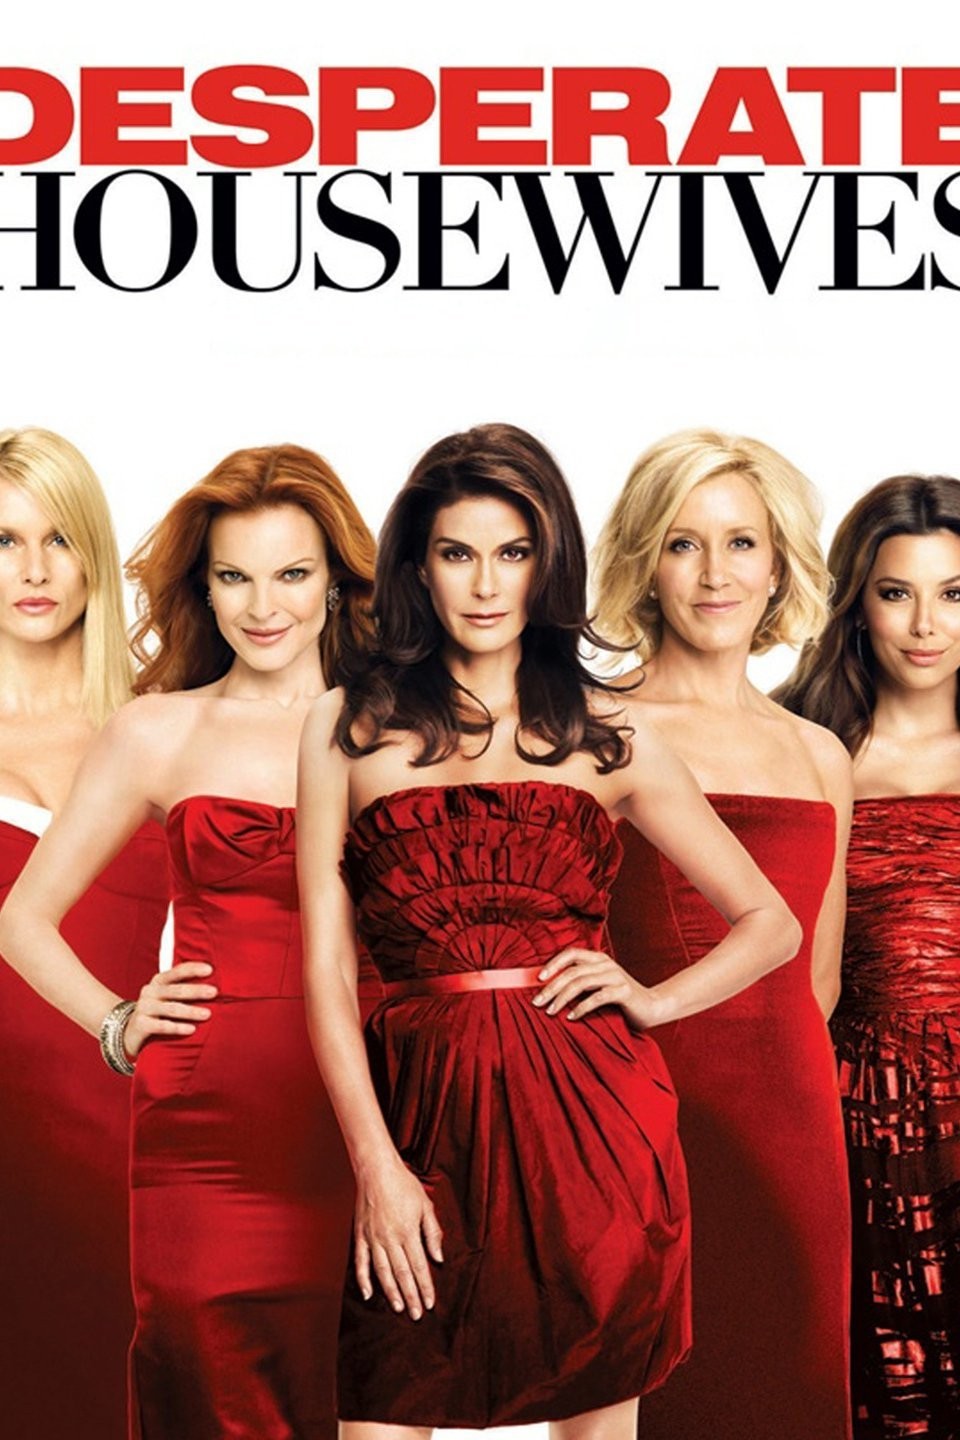 How Can I Watch Desperate Housewives On Streaming Service